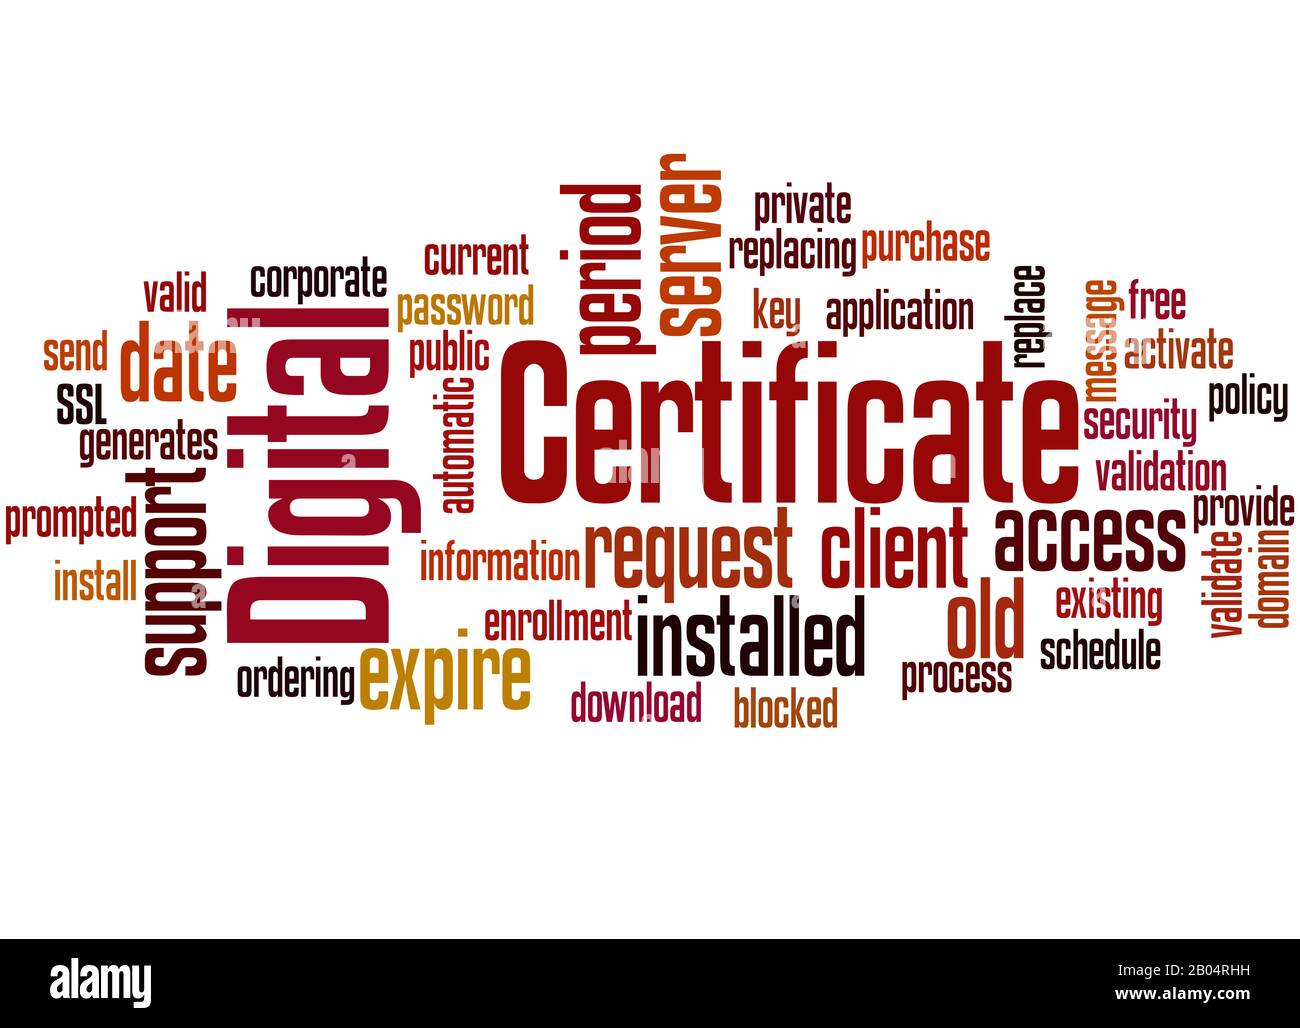 Digital certificate word cloud concept on white background. Stock Photo